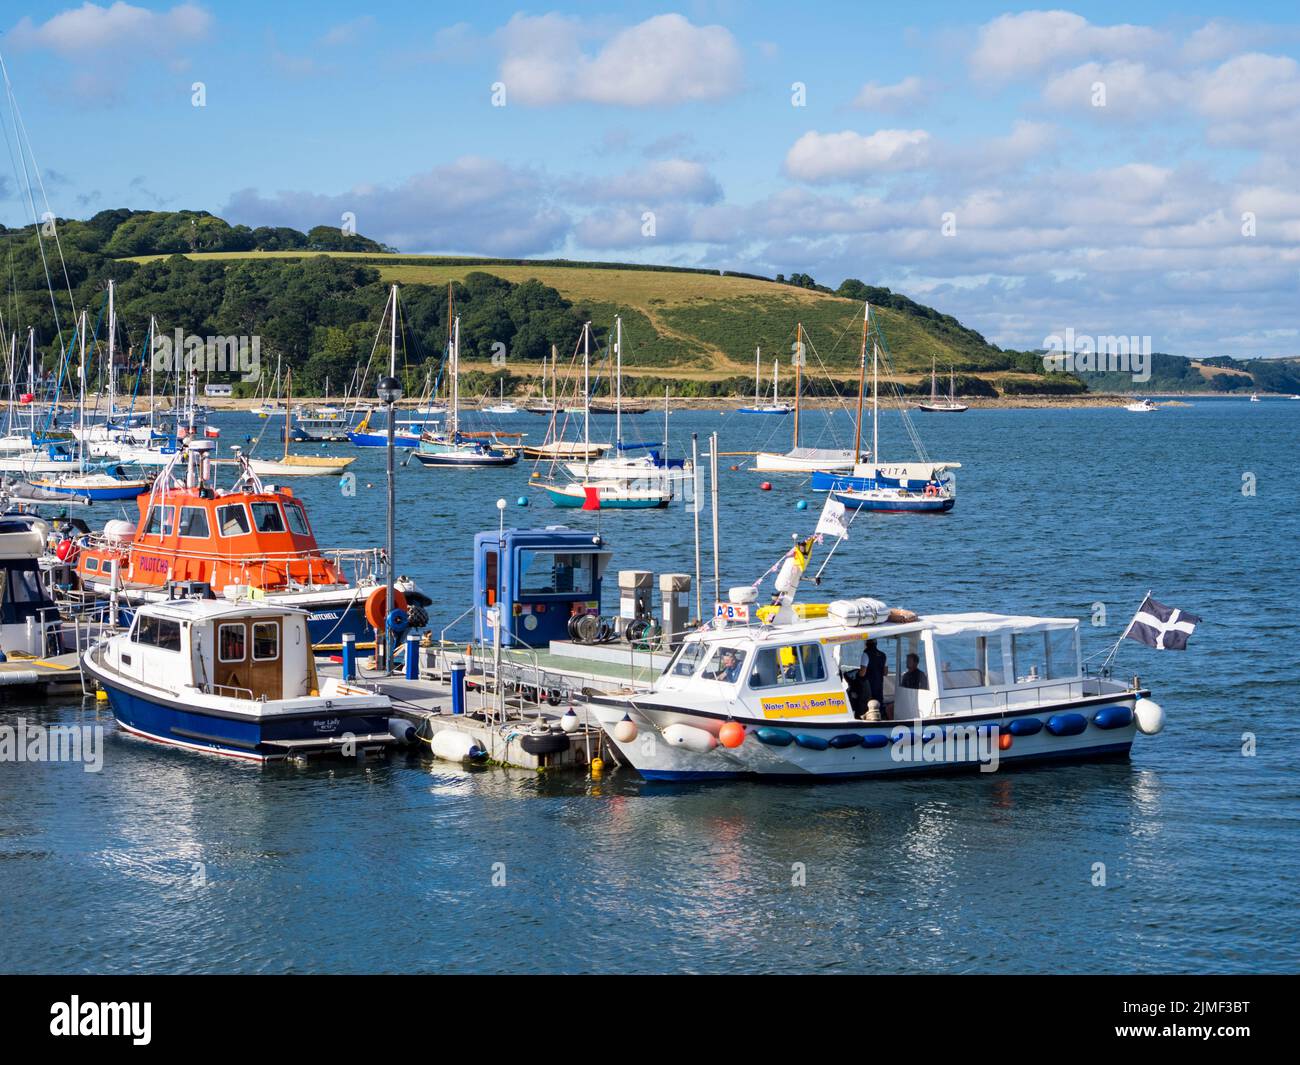 Water Taxi with Cornish Flag, Falmouth Harbour, Falmouth, Cornwall, England, UK. GB. Stock Photo